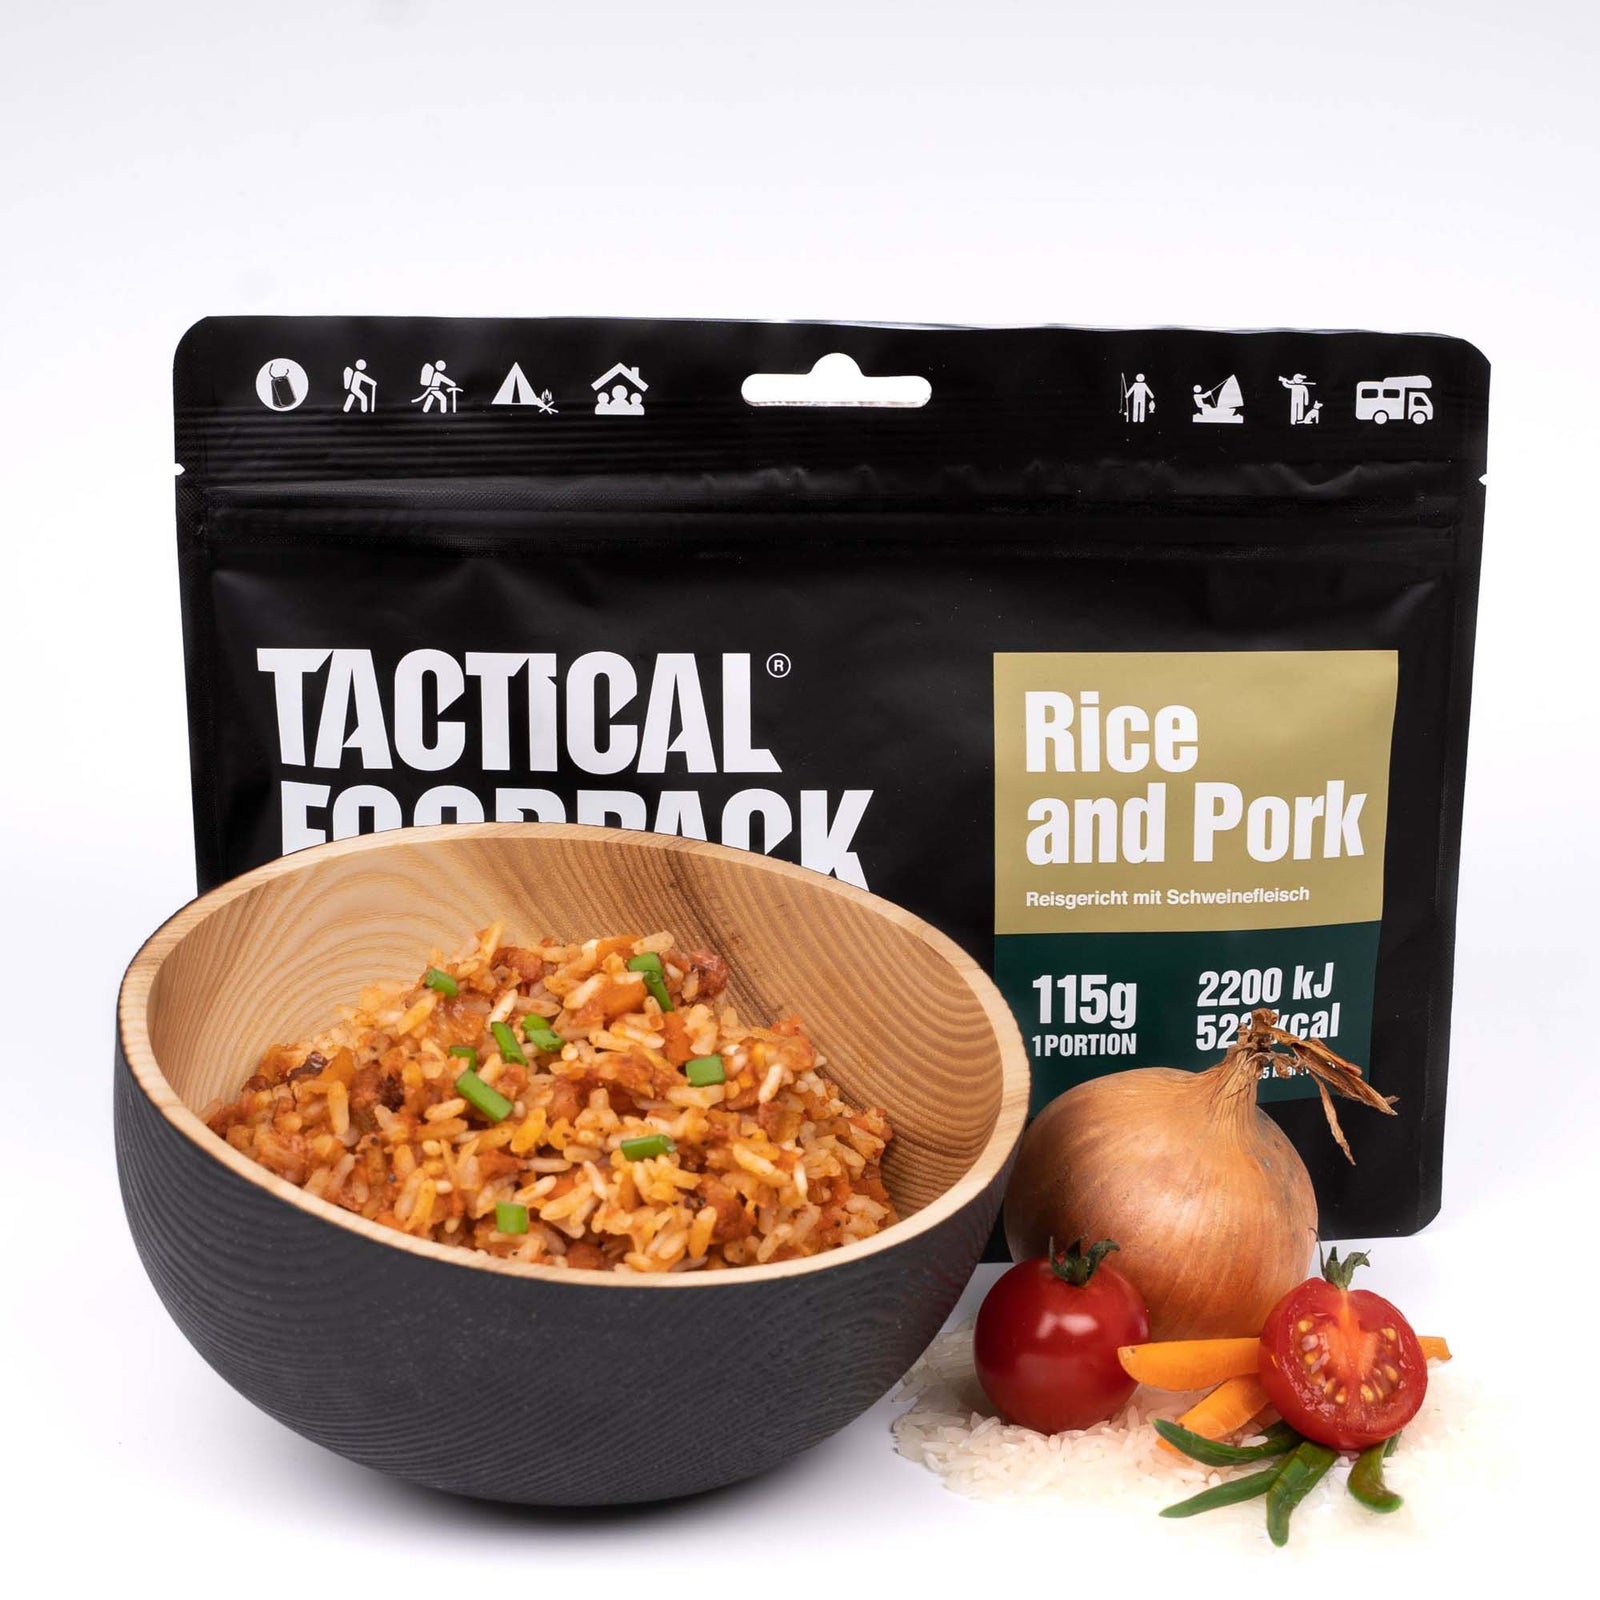 Tactical Foodpack | Rice and Pork 115g - Riso e maiale